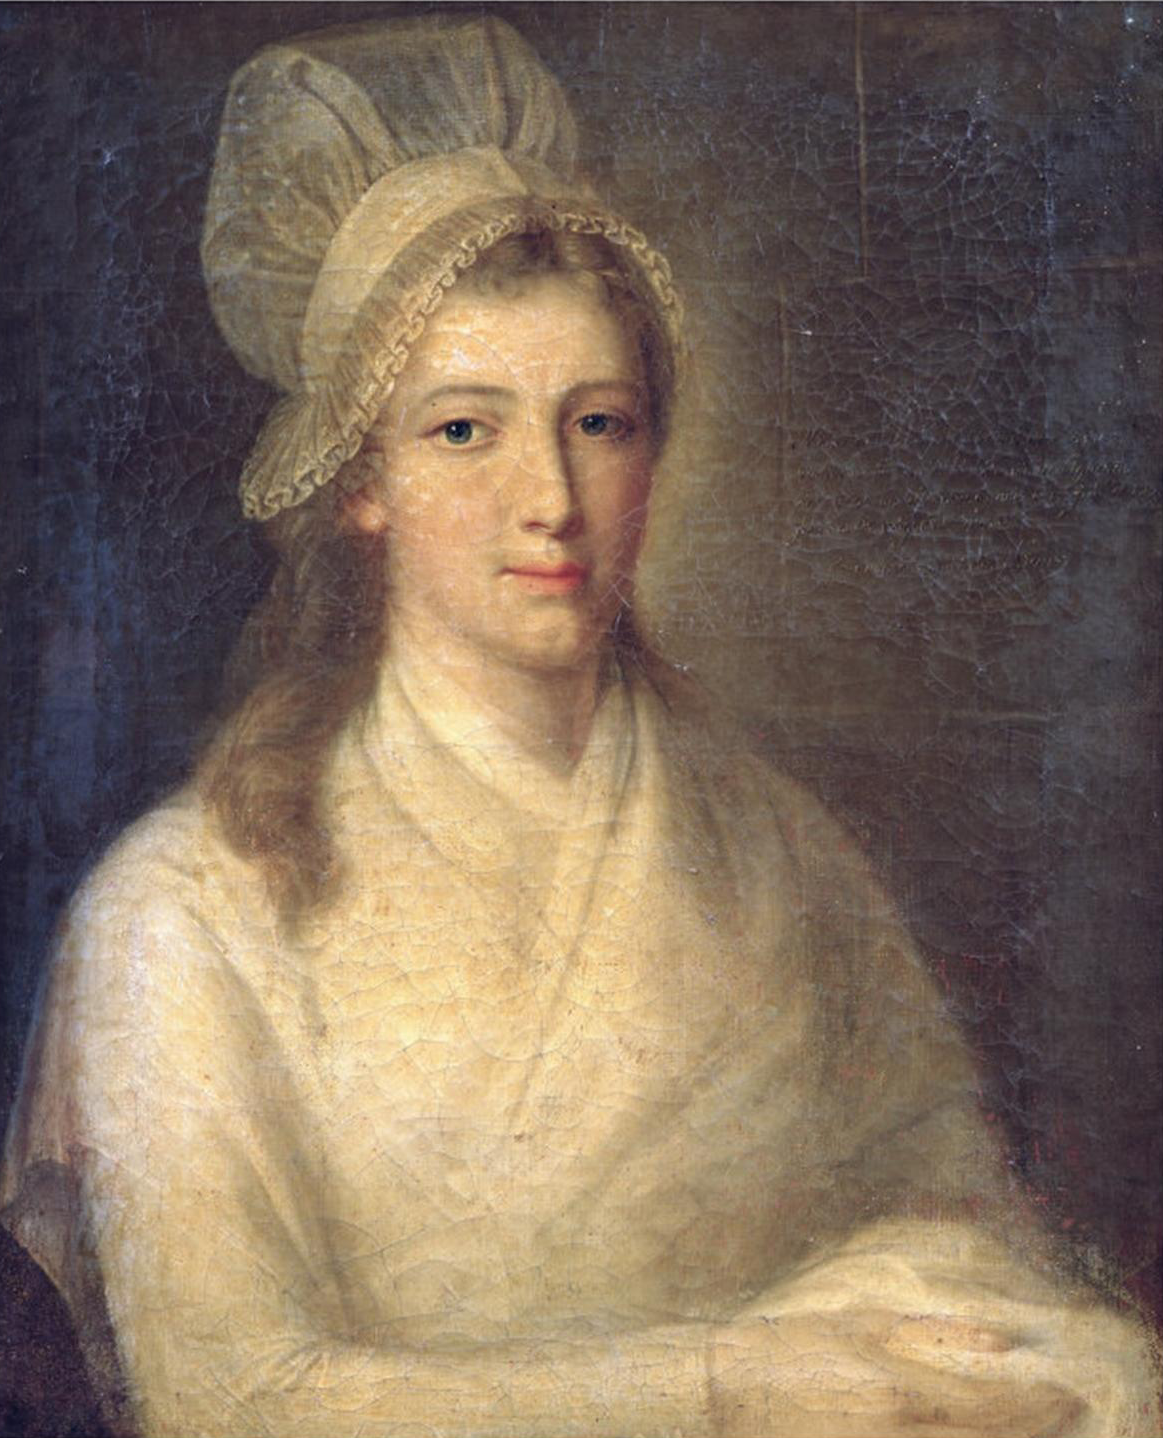 http://upload.wikimedia.org/wikipedia/commons/6/68/Charlotte_Corday.PNG